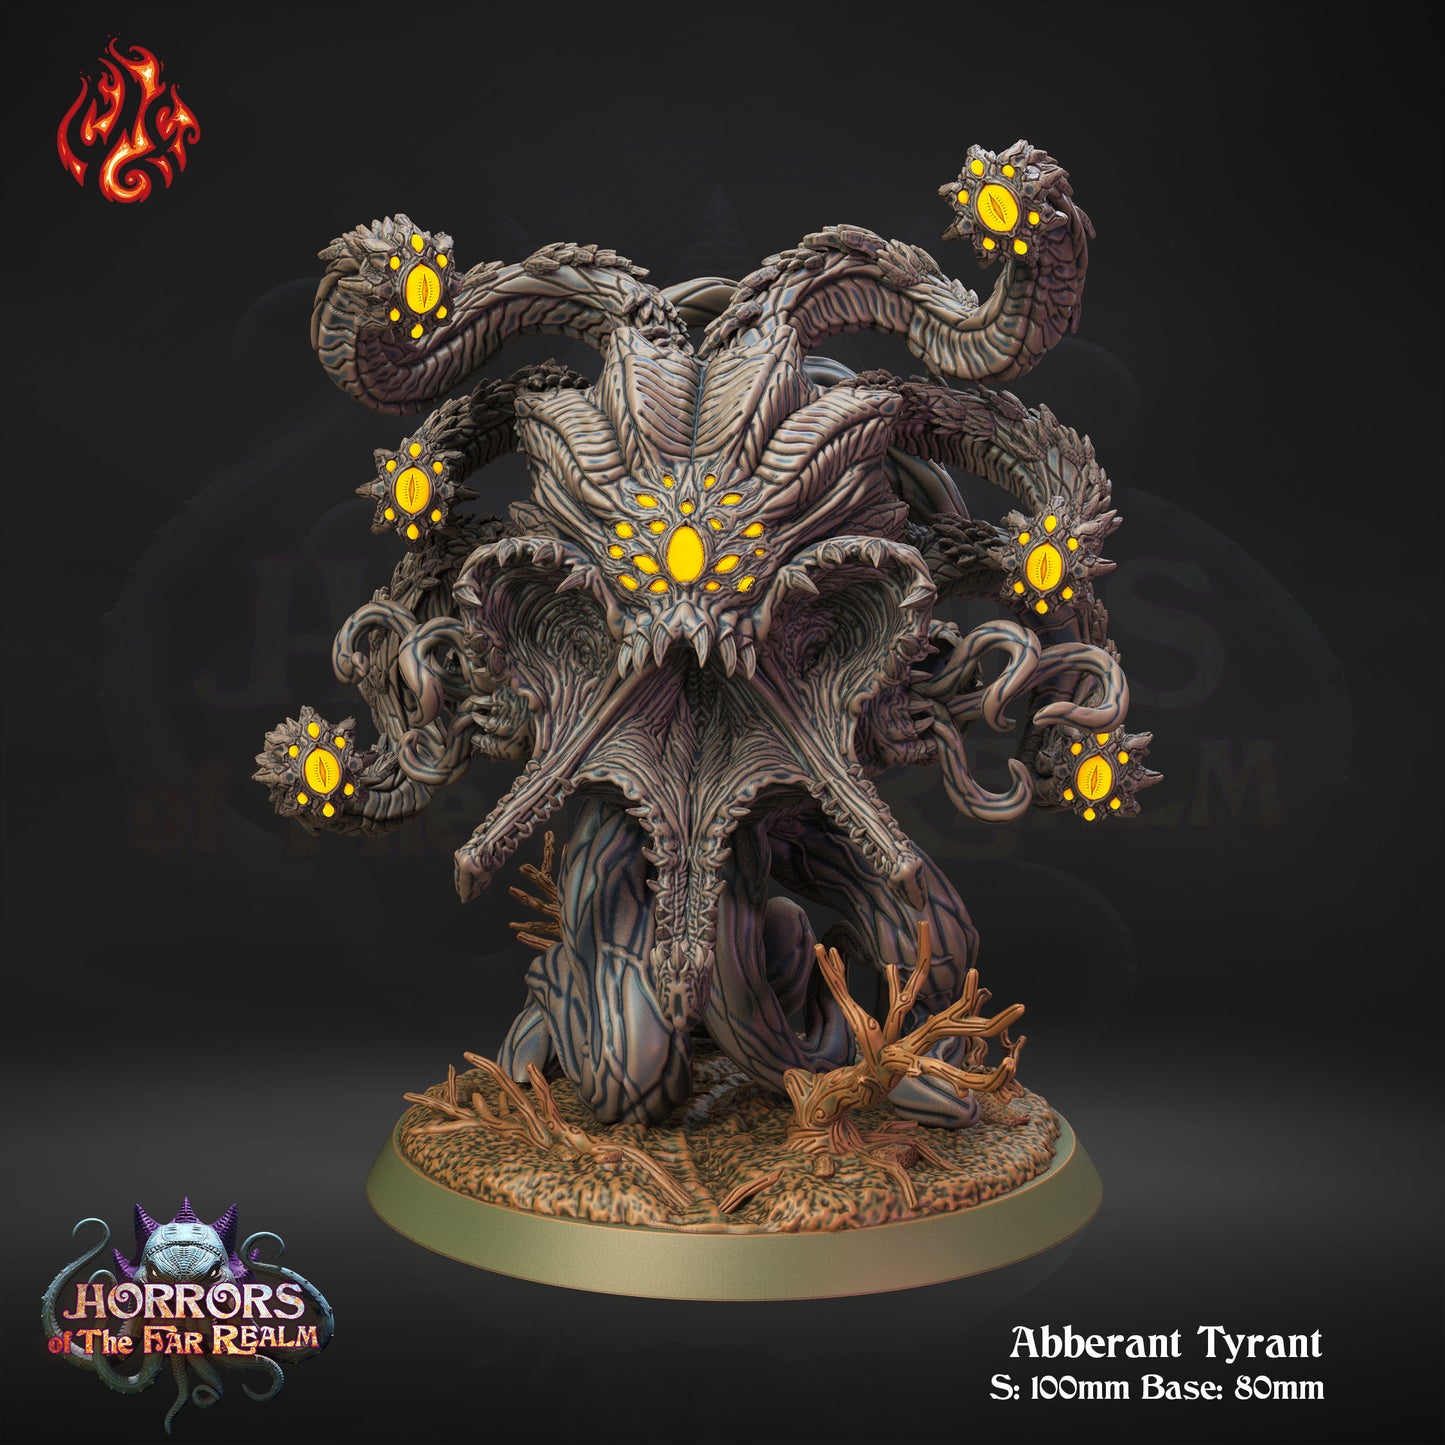 Abberant Tyrant - Horrors of the Far Realm - from Crippled God Foundry - Table-top gaming mini and collectable for painting.